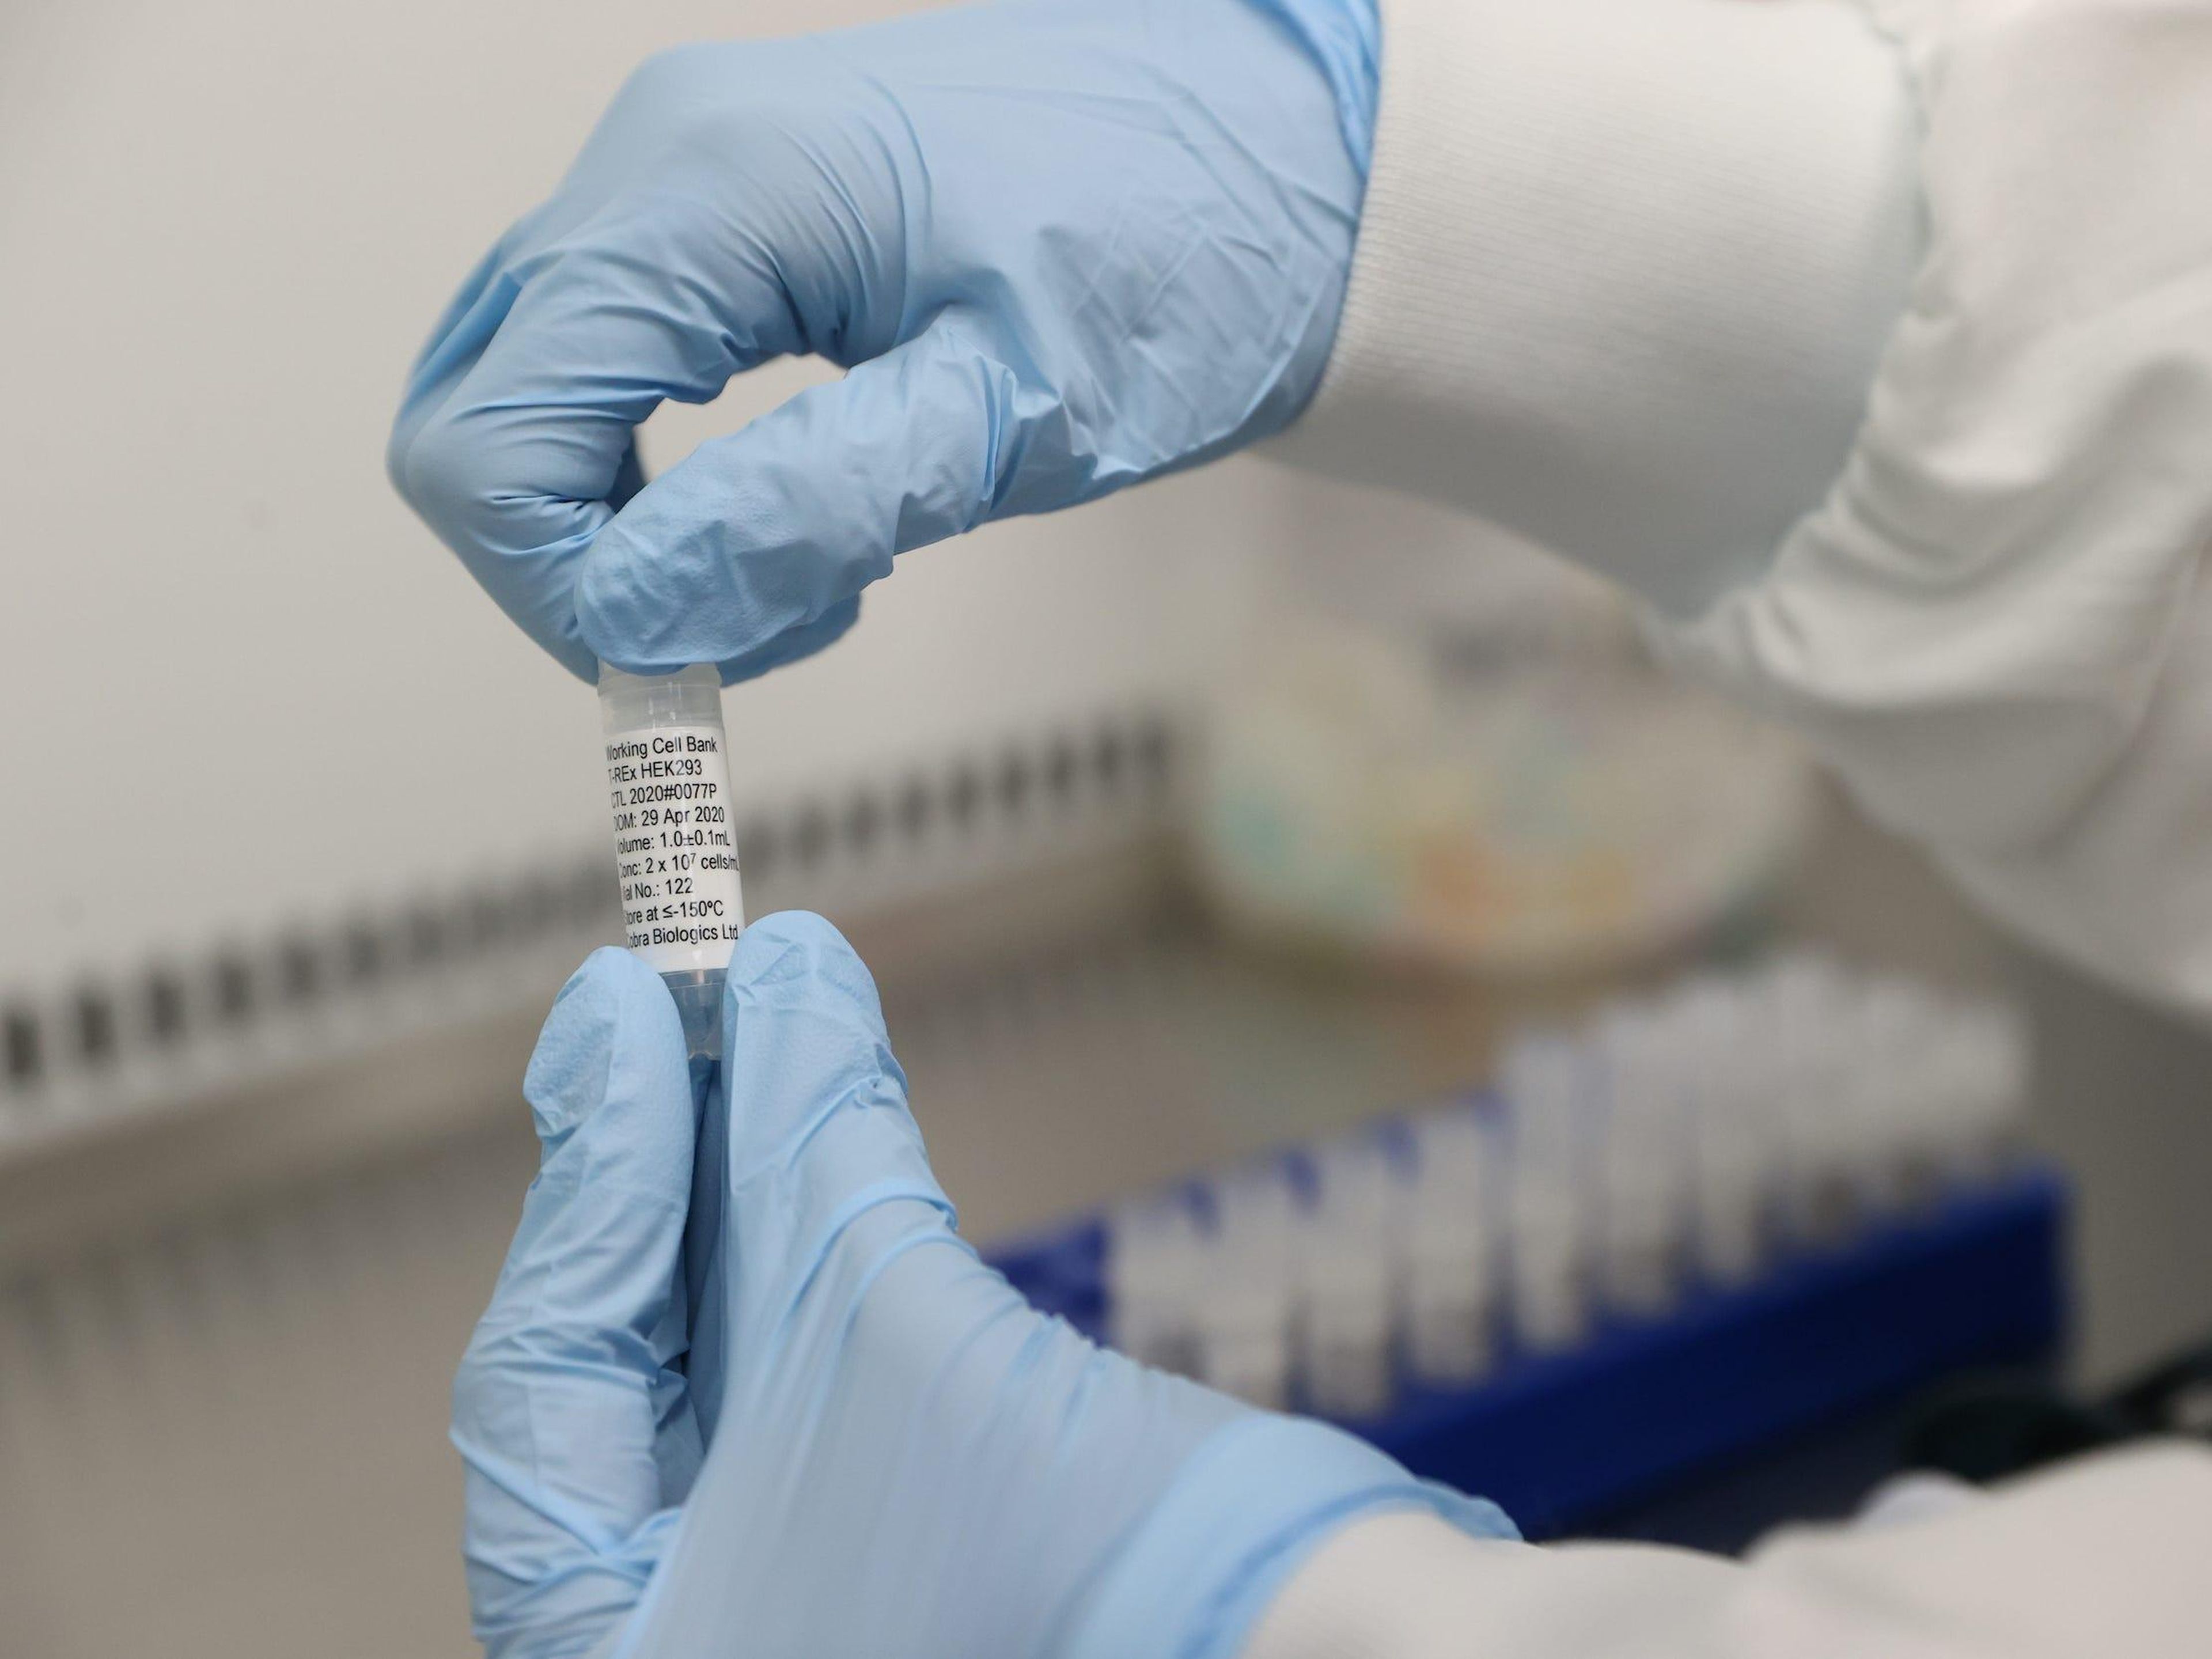 Scientists working on a vaccine for COVID-19 in Keele, England.